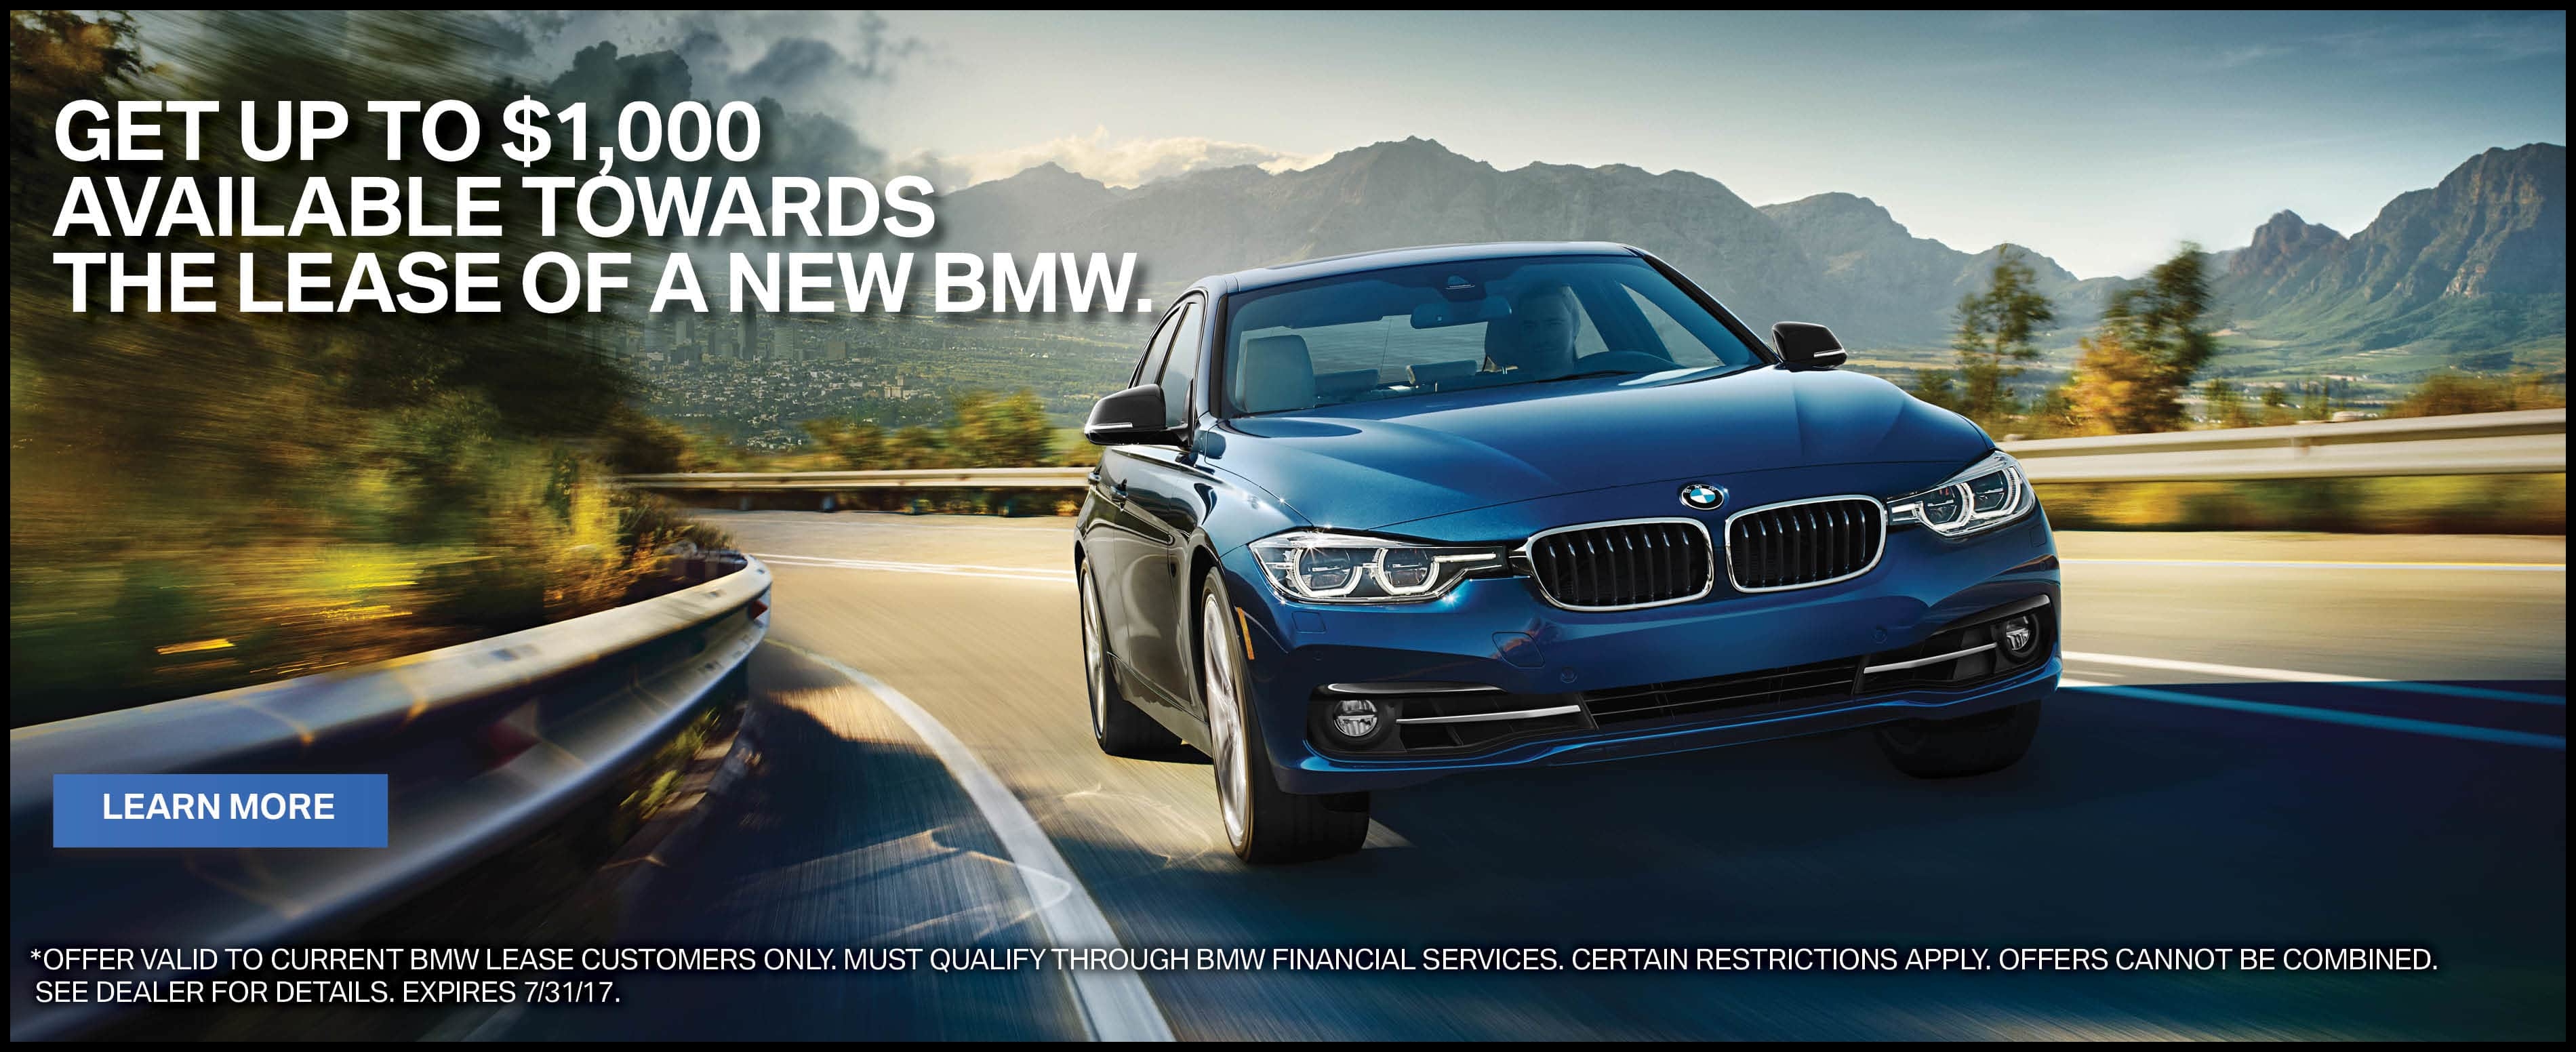 BMW Financial Services Lease Loyalty Promotion